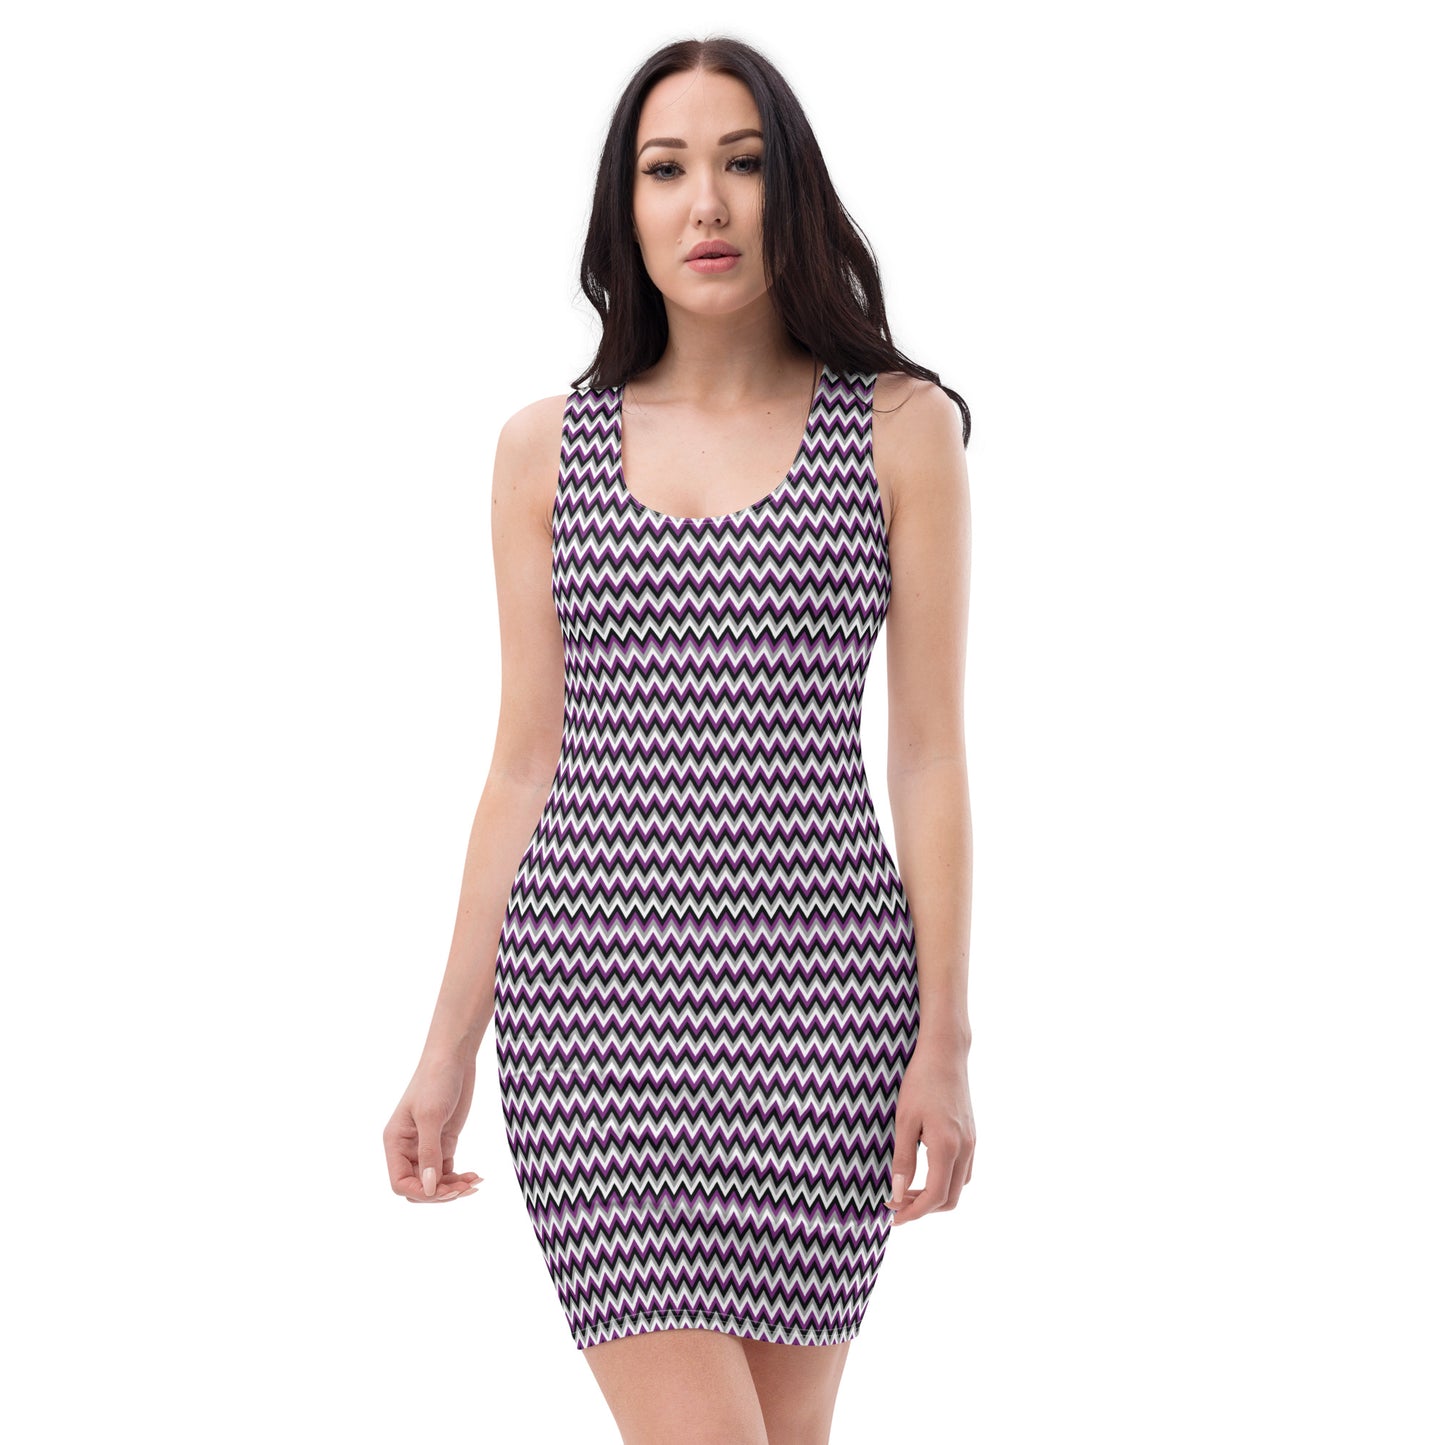 Asexual Pride Bodycon Dress - LGBTQIA Black, Gray, Purple, and White Flag Sexy Fitted Dress - Parade Club Vacation